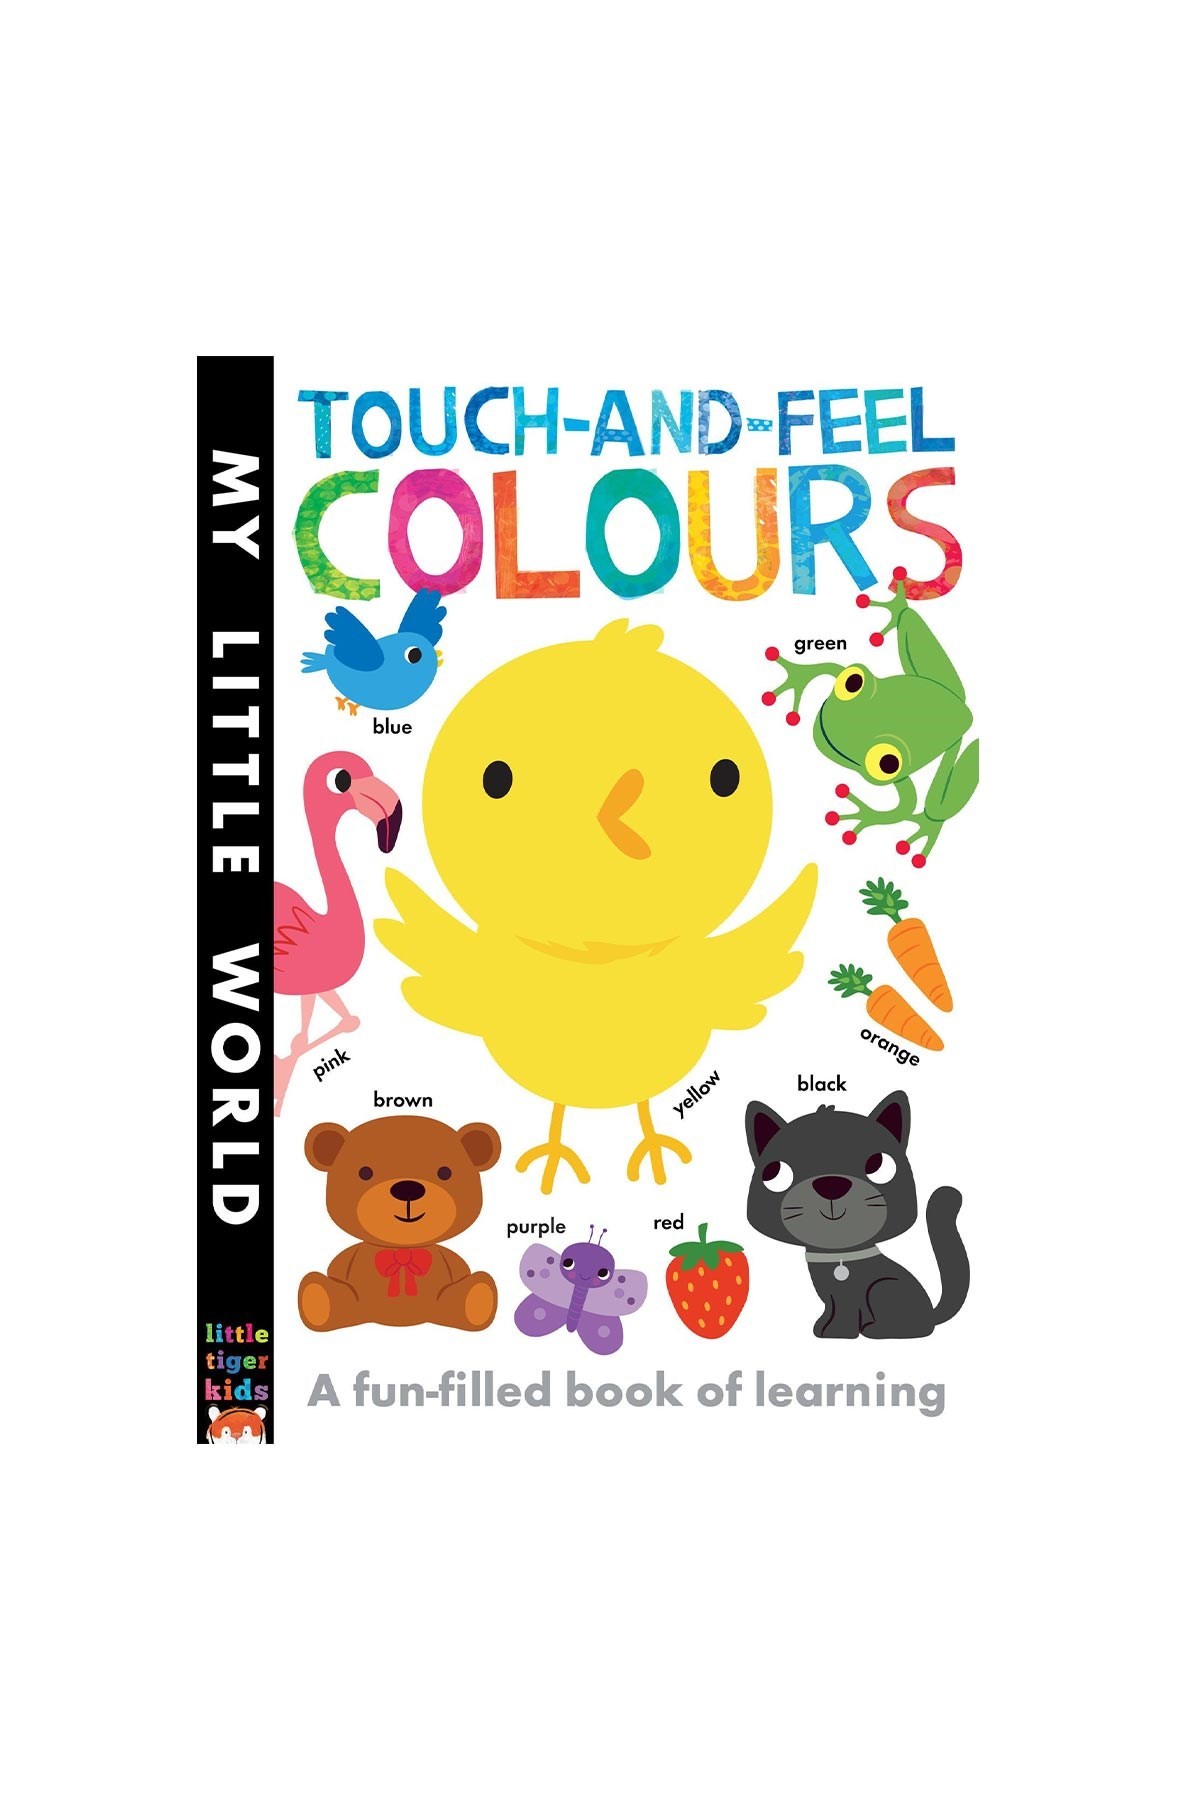 Tiger Tales Touch-and-feel Colours